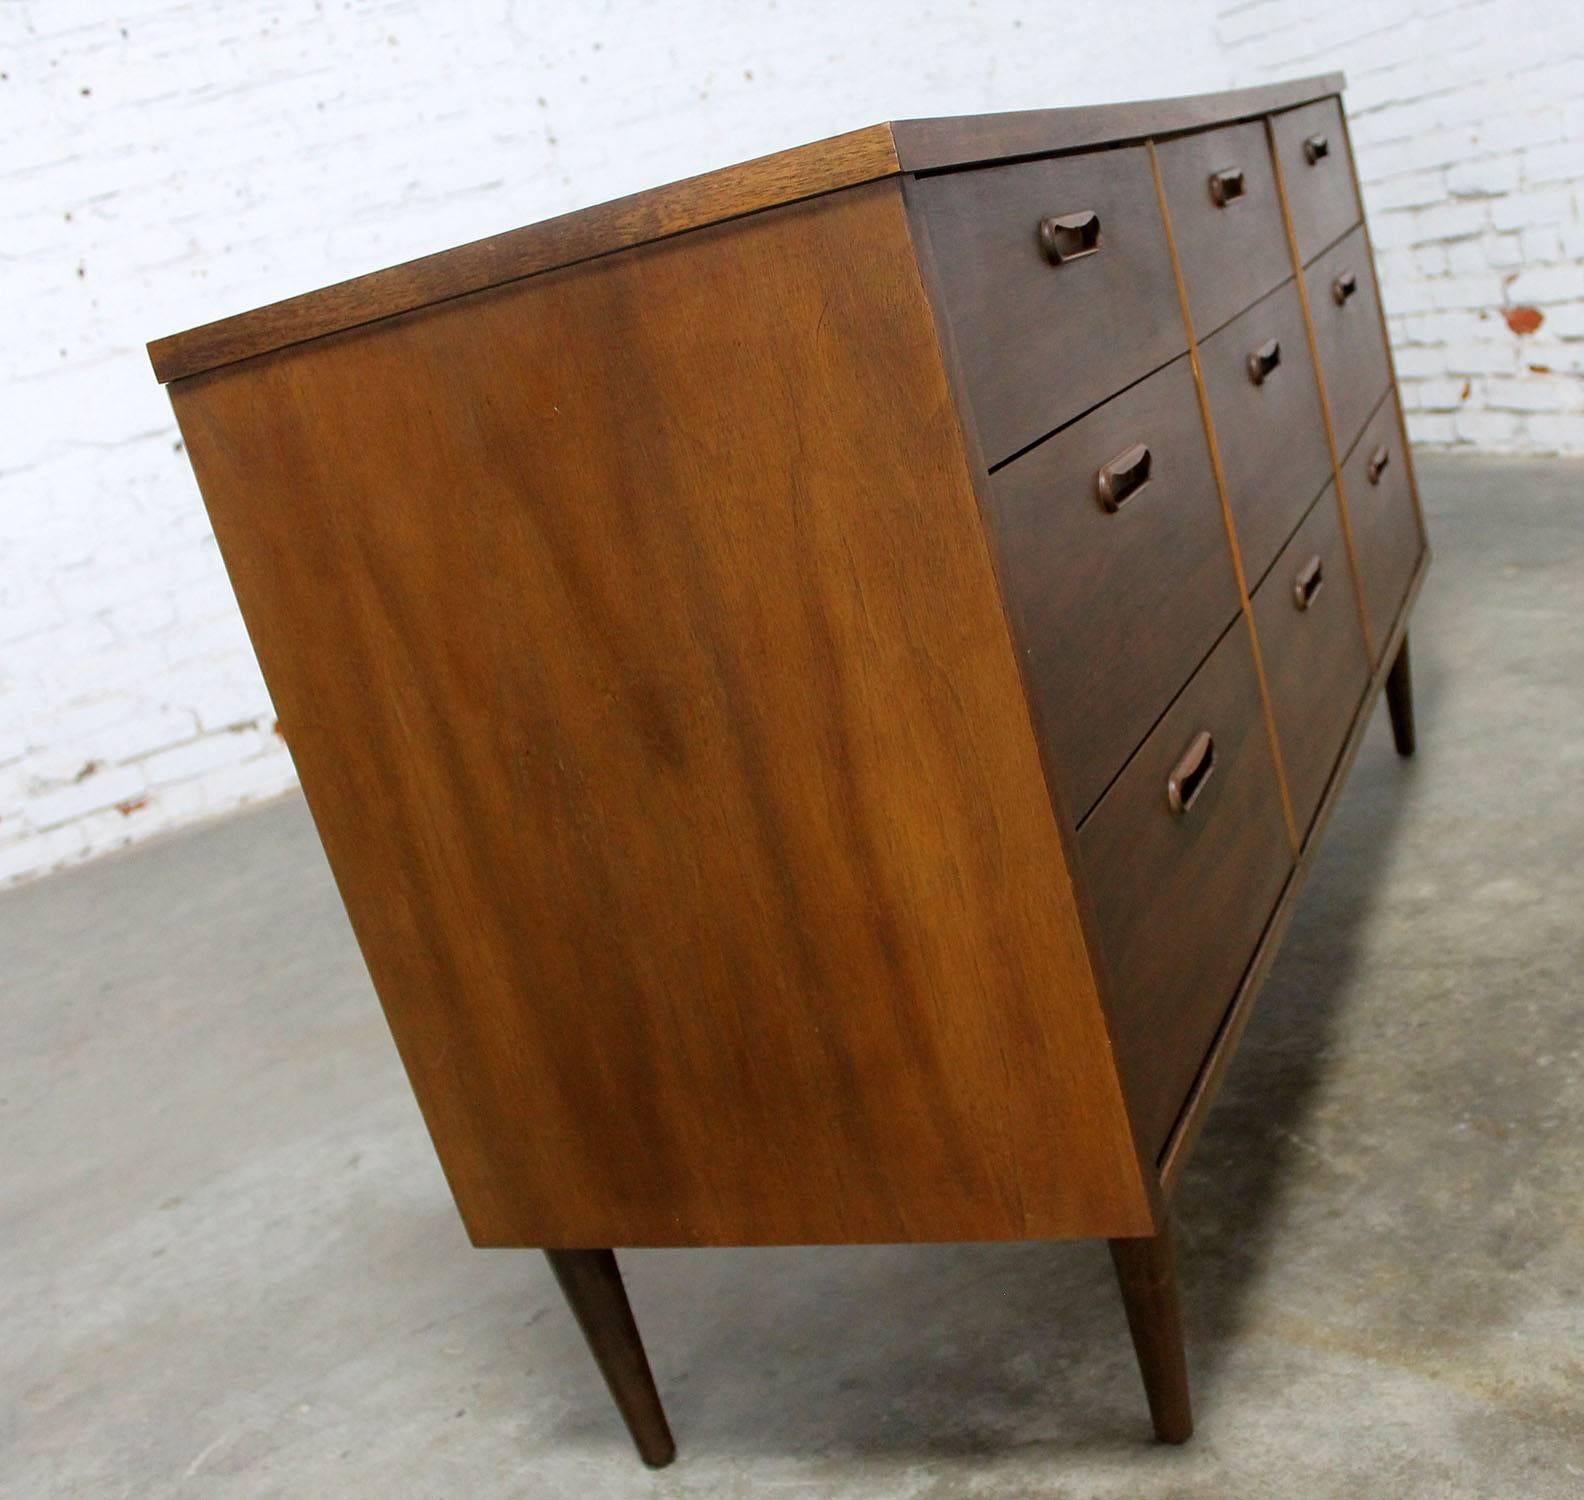 Handsome Mid-Century Modern walnut dresser with nine drawers in Danish or Scandinavian Modern style. This piece is in good original vintage condition, circa 1960. There are the normal nicks and dings you would expect for a piece of its age.

Who